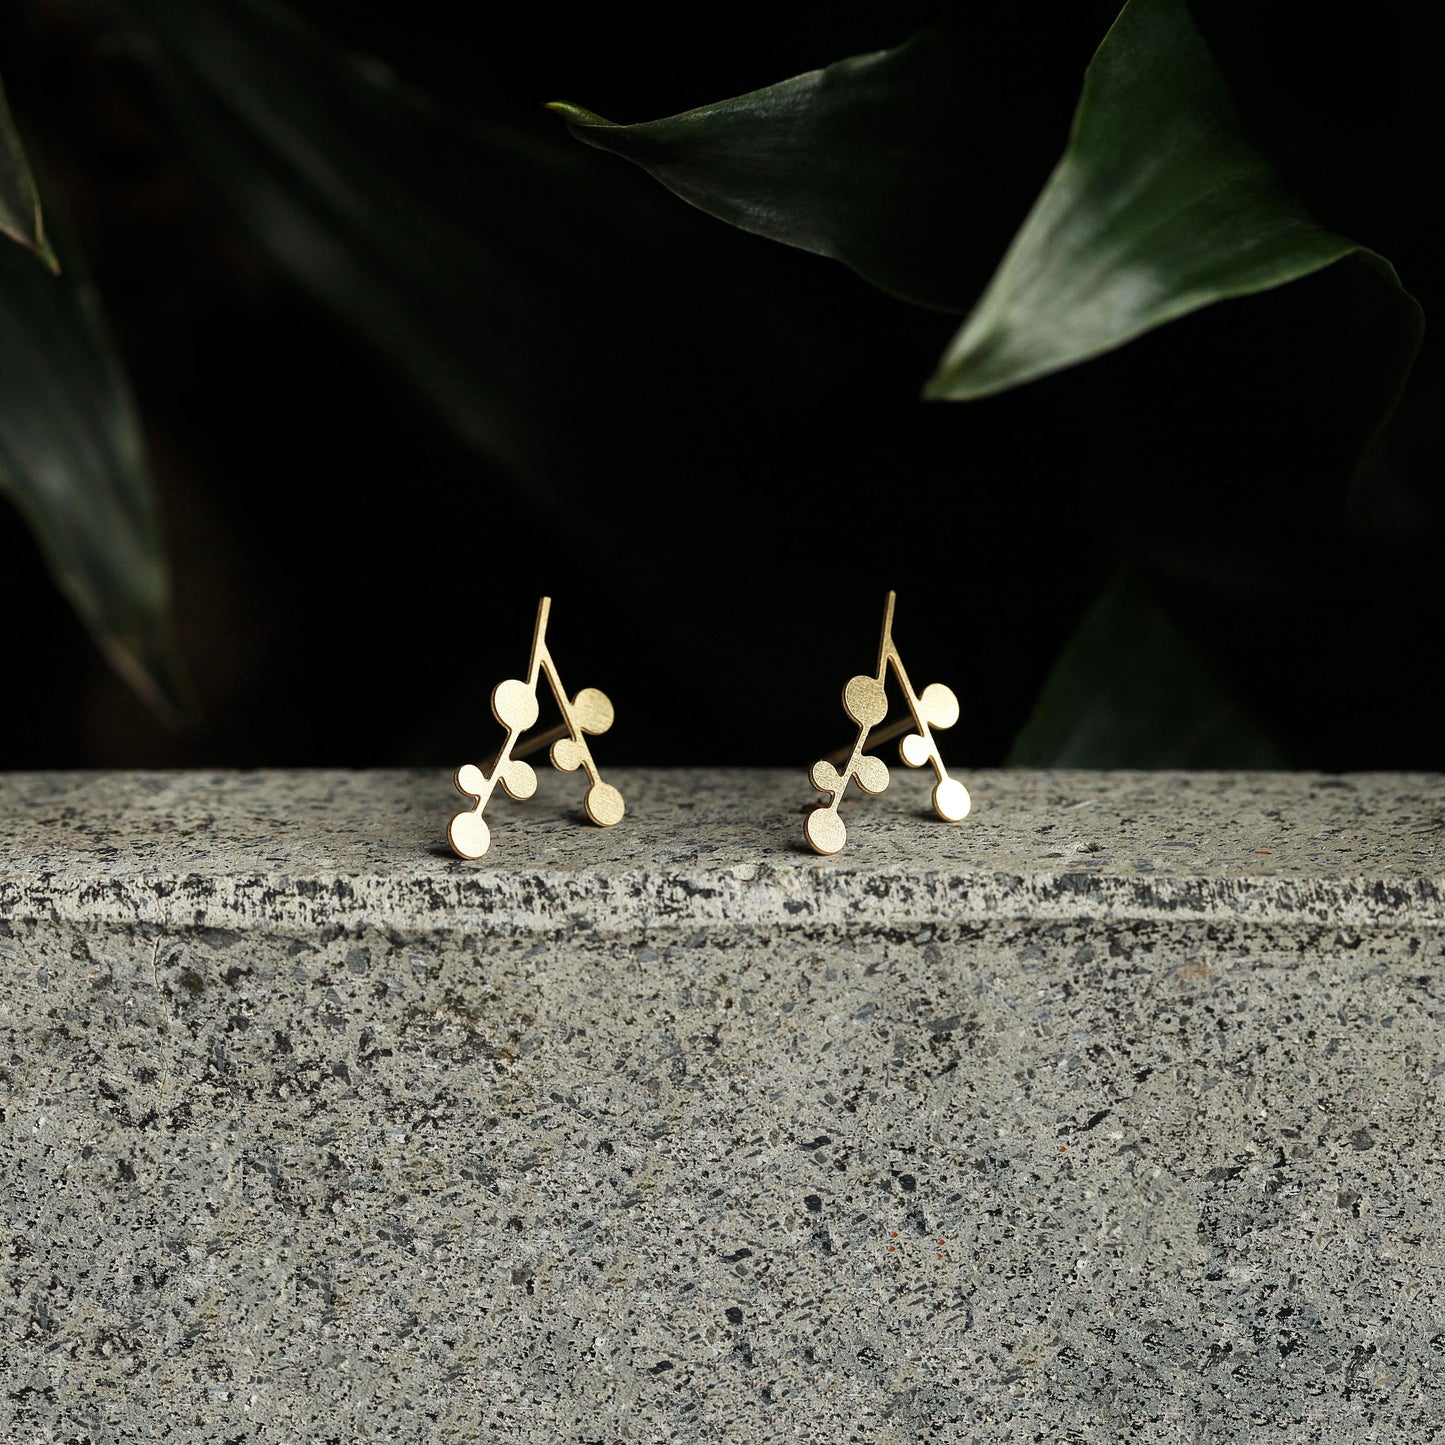 SNOWDAYS EARRINGS EXTRA SMALL GOLD